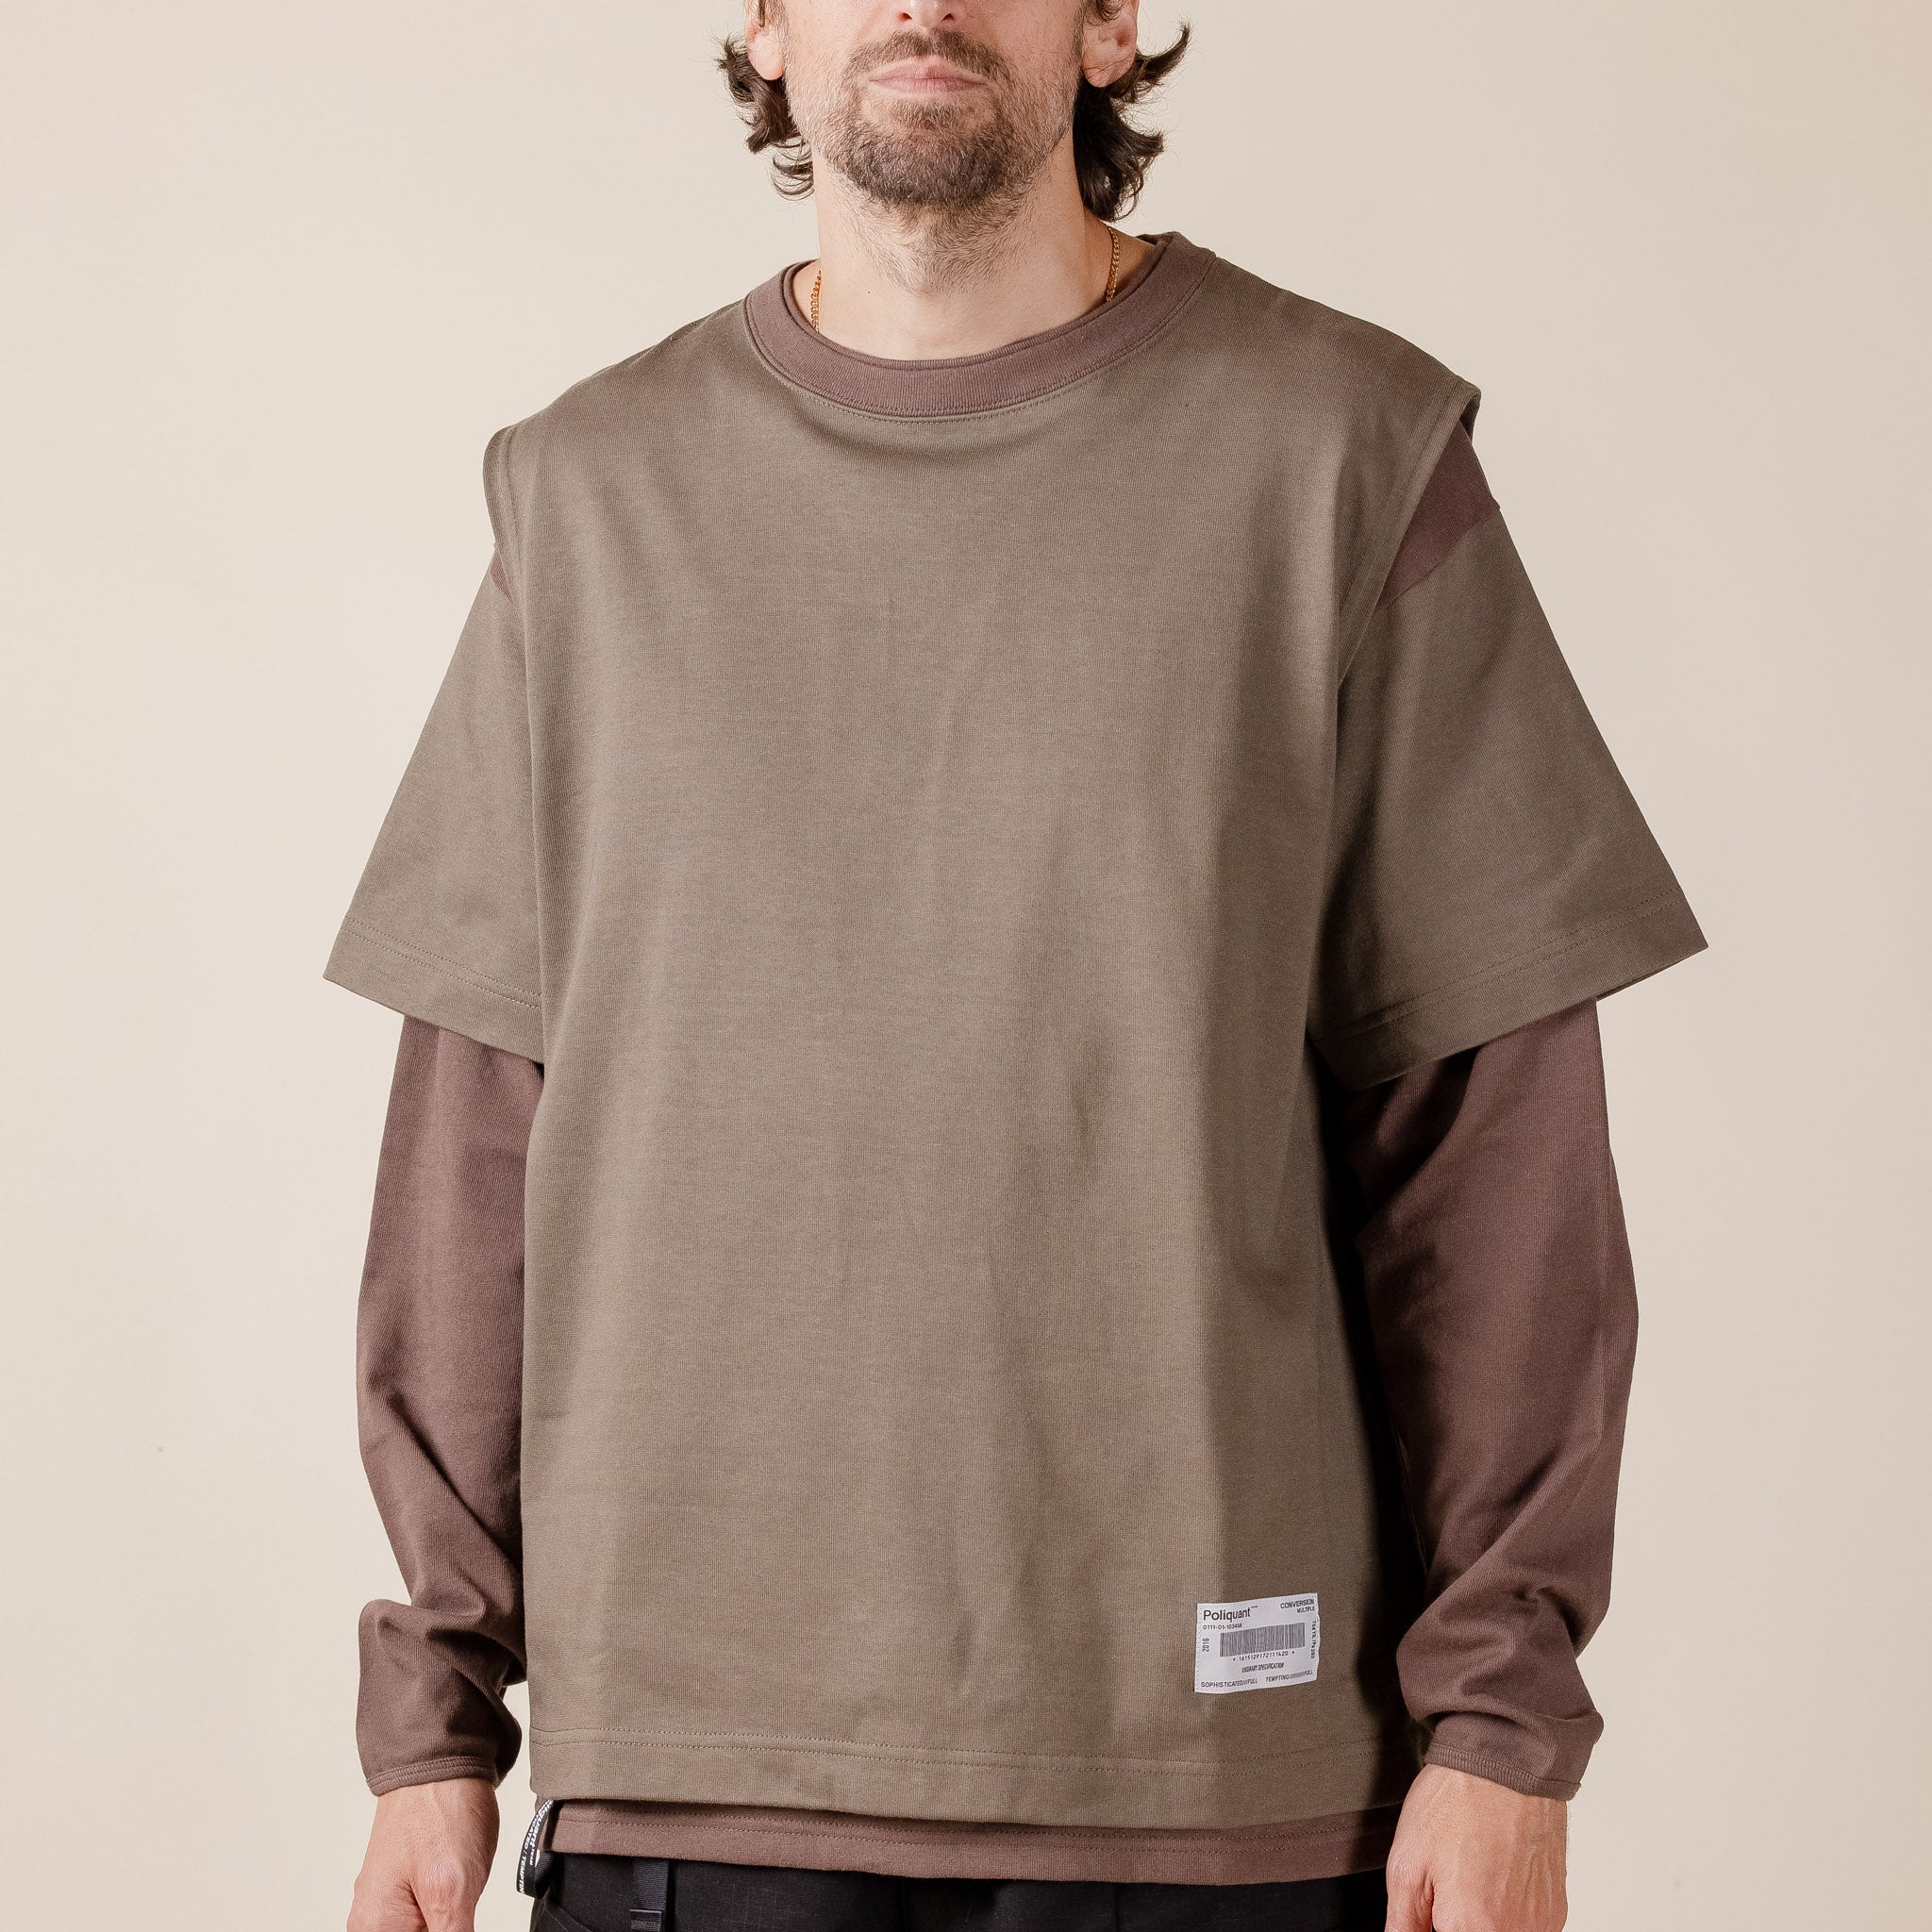 Poliquant - Switching Layered L/S T-Shirt - Olive Brown "poliquant japan" "poliquant stockists" "poliquant usa"